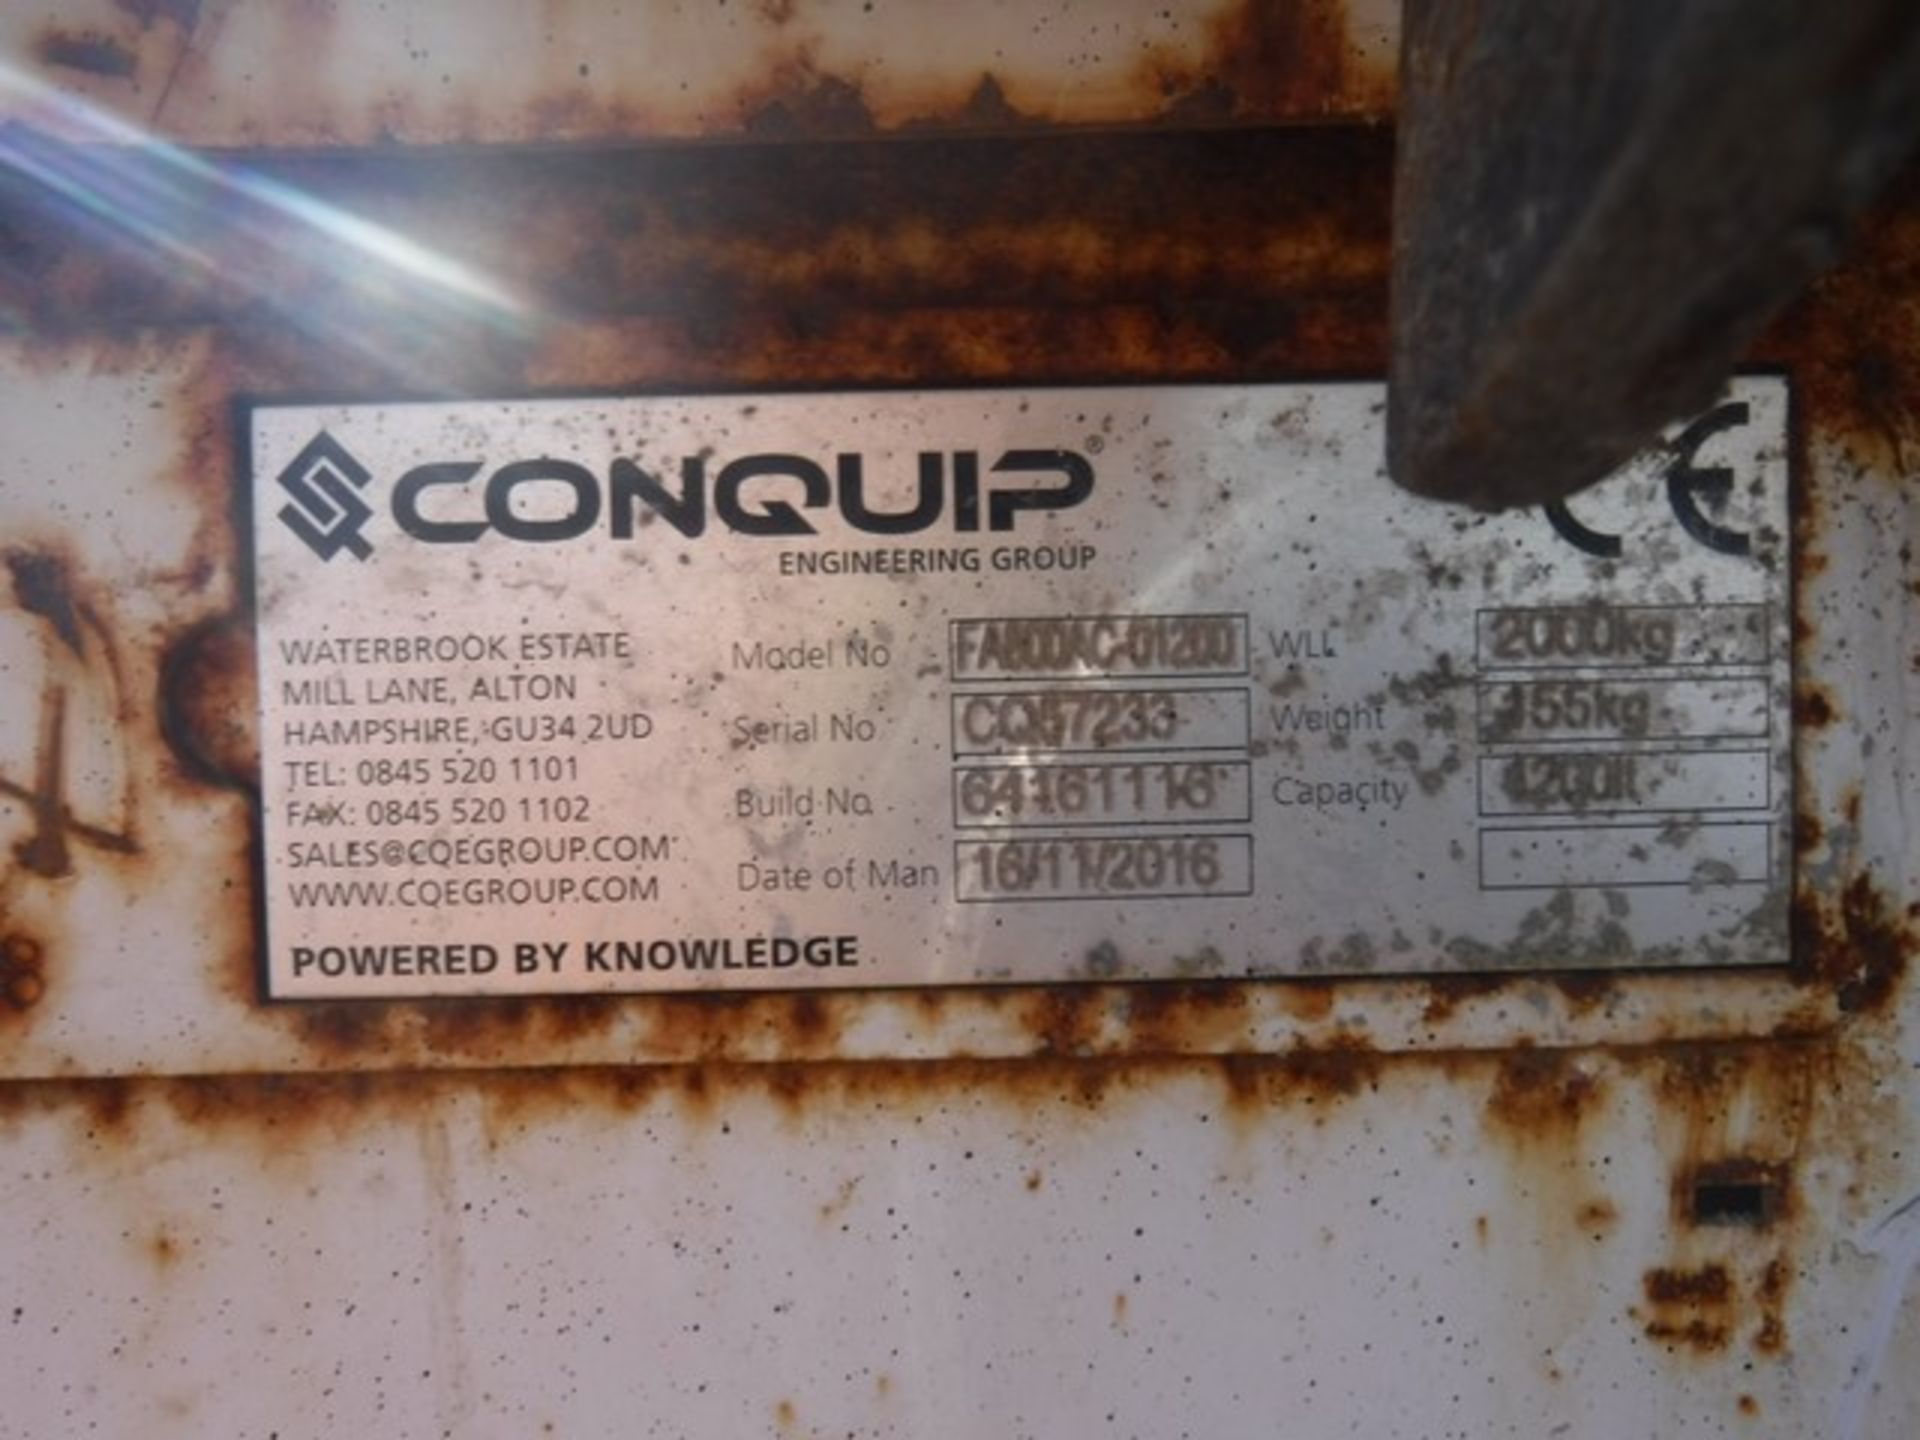 2016 CONQUIP 1200ltr tipping skips x 2 - Image 4 of 5